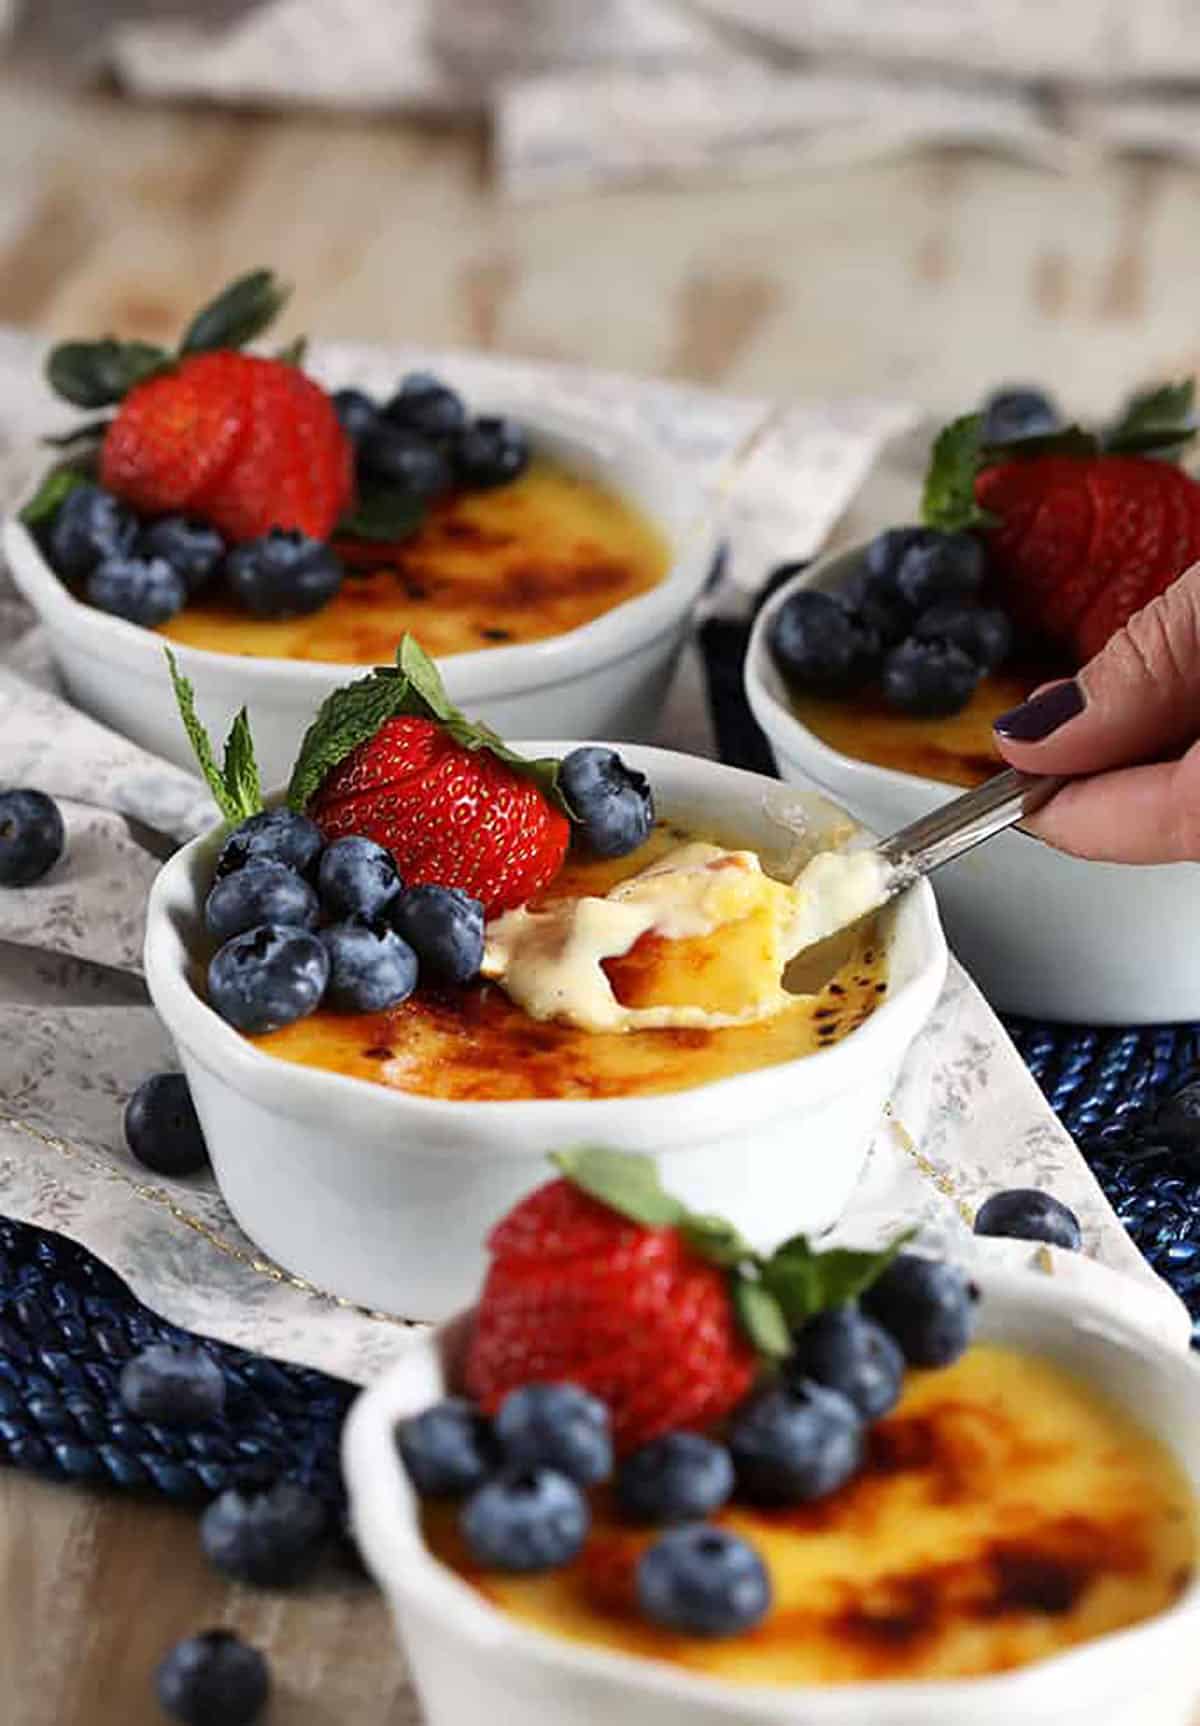 Creme Brûlée topped with berries with a spoon taking a bite out of it.